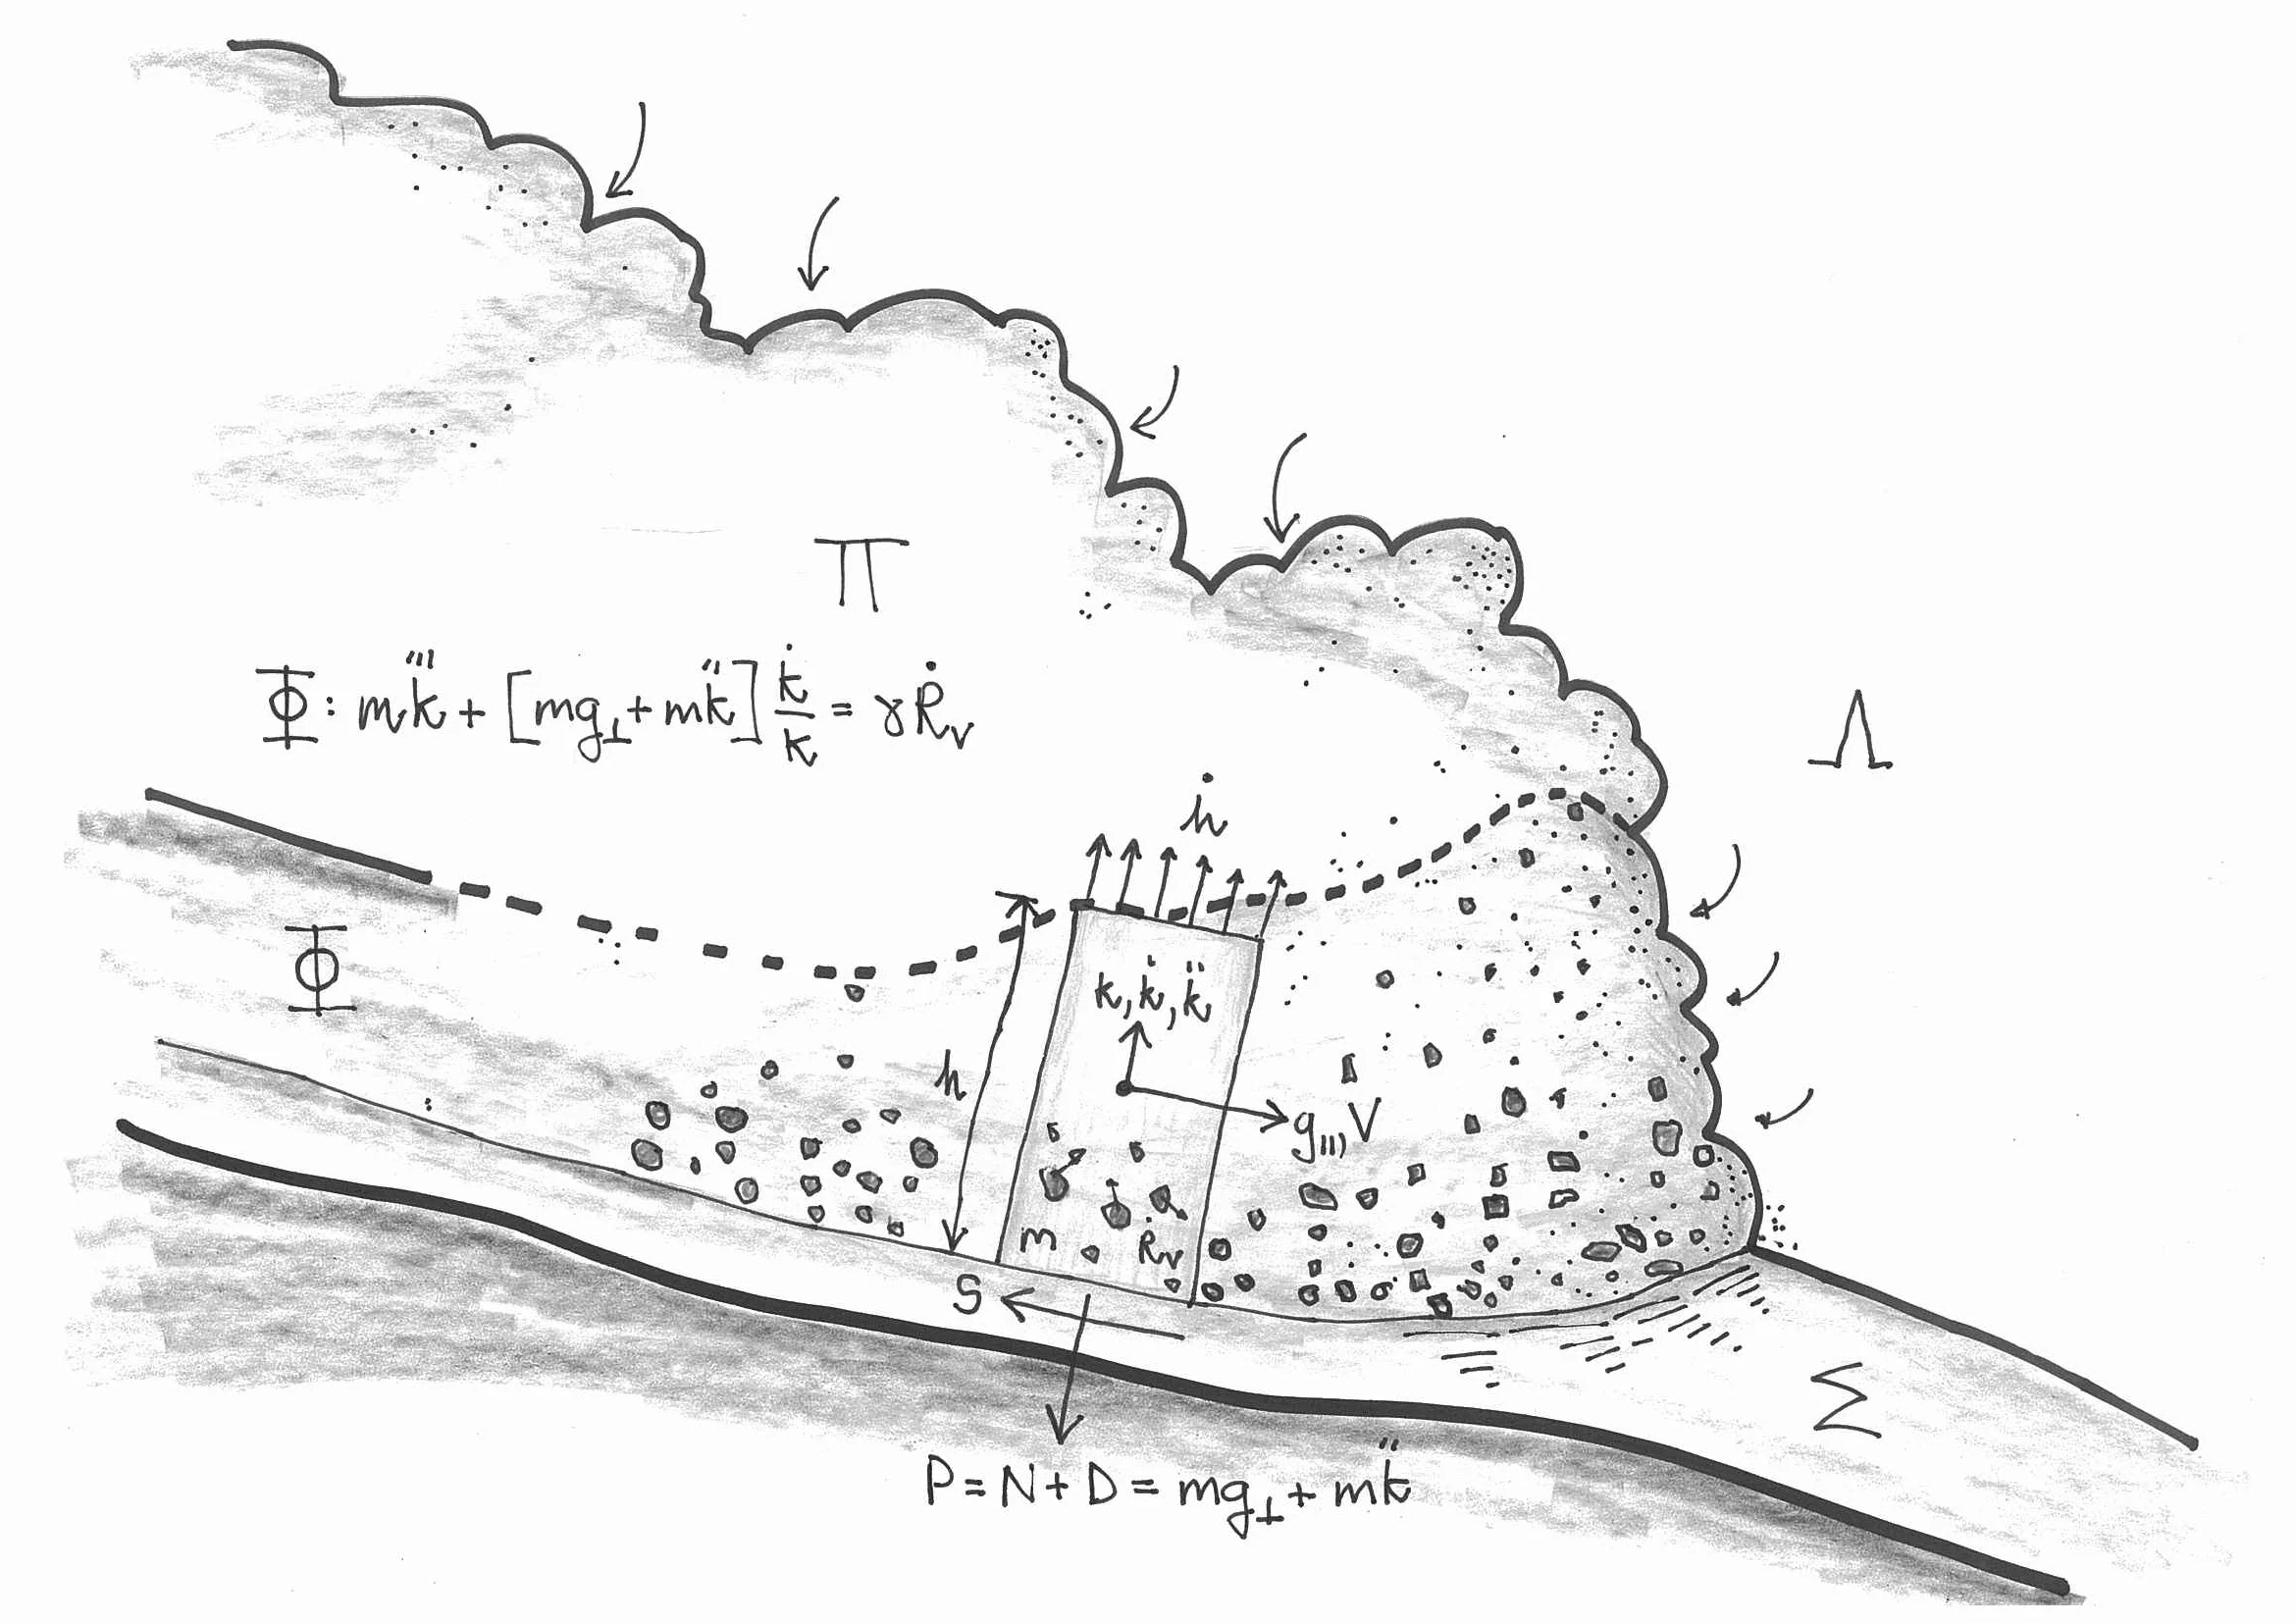 powder_cloud_schematic_perry_bw